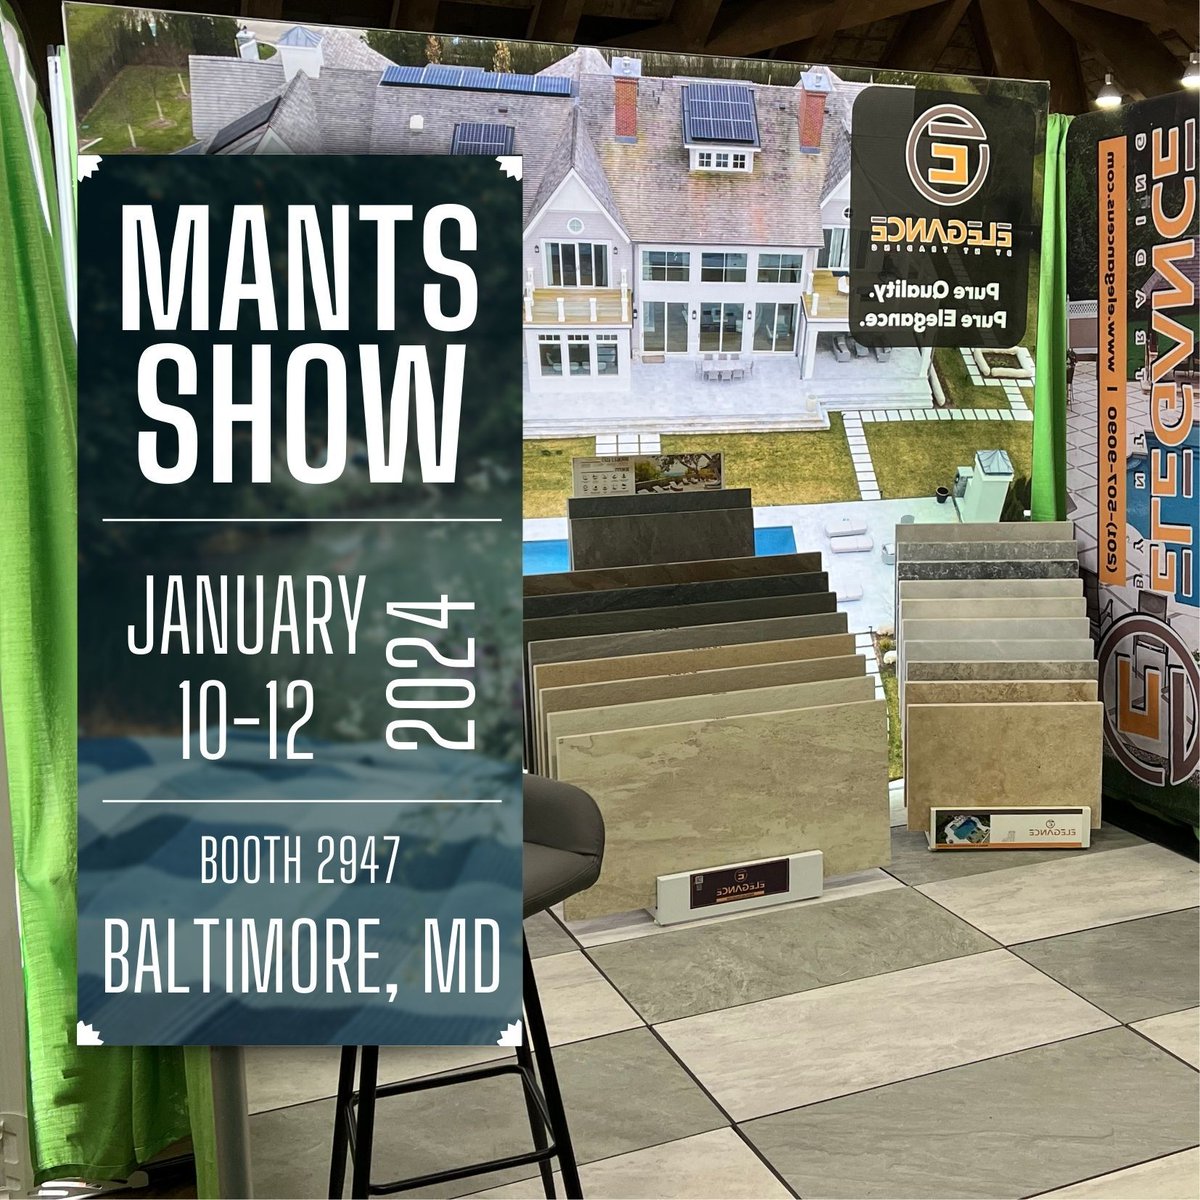 Join us at MANTS 2024 in Baltimore, MD! 🌟 

We're excited to showcase our newest products and can't wait for you to see them. 

Swing by our booth 2947 for a chat and grab your copy of our latest catalog. Let's explore the possibilities together! #MANTS2024 #EleganceByNTTrading